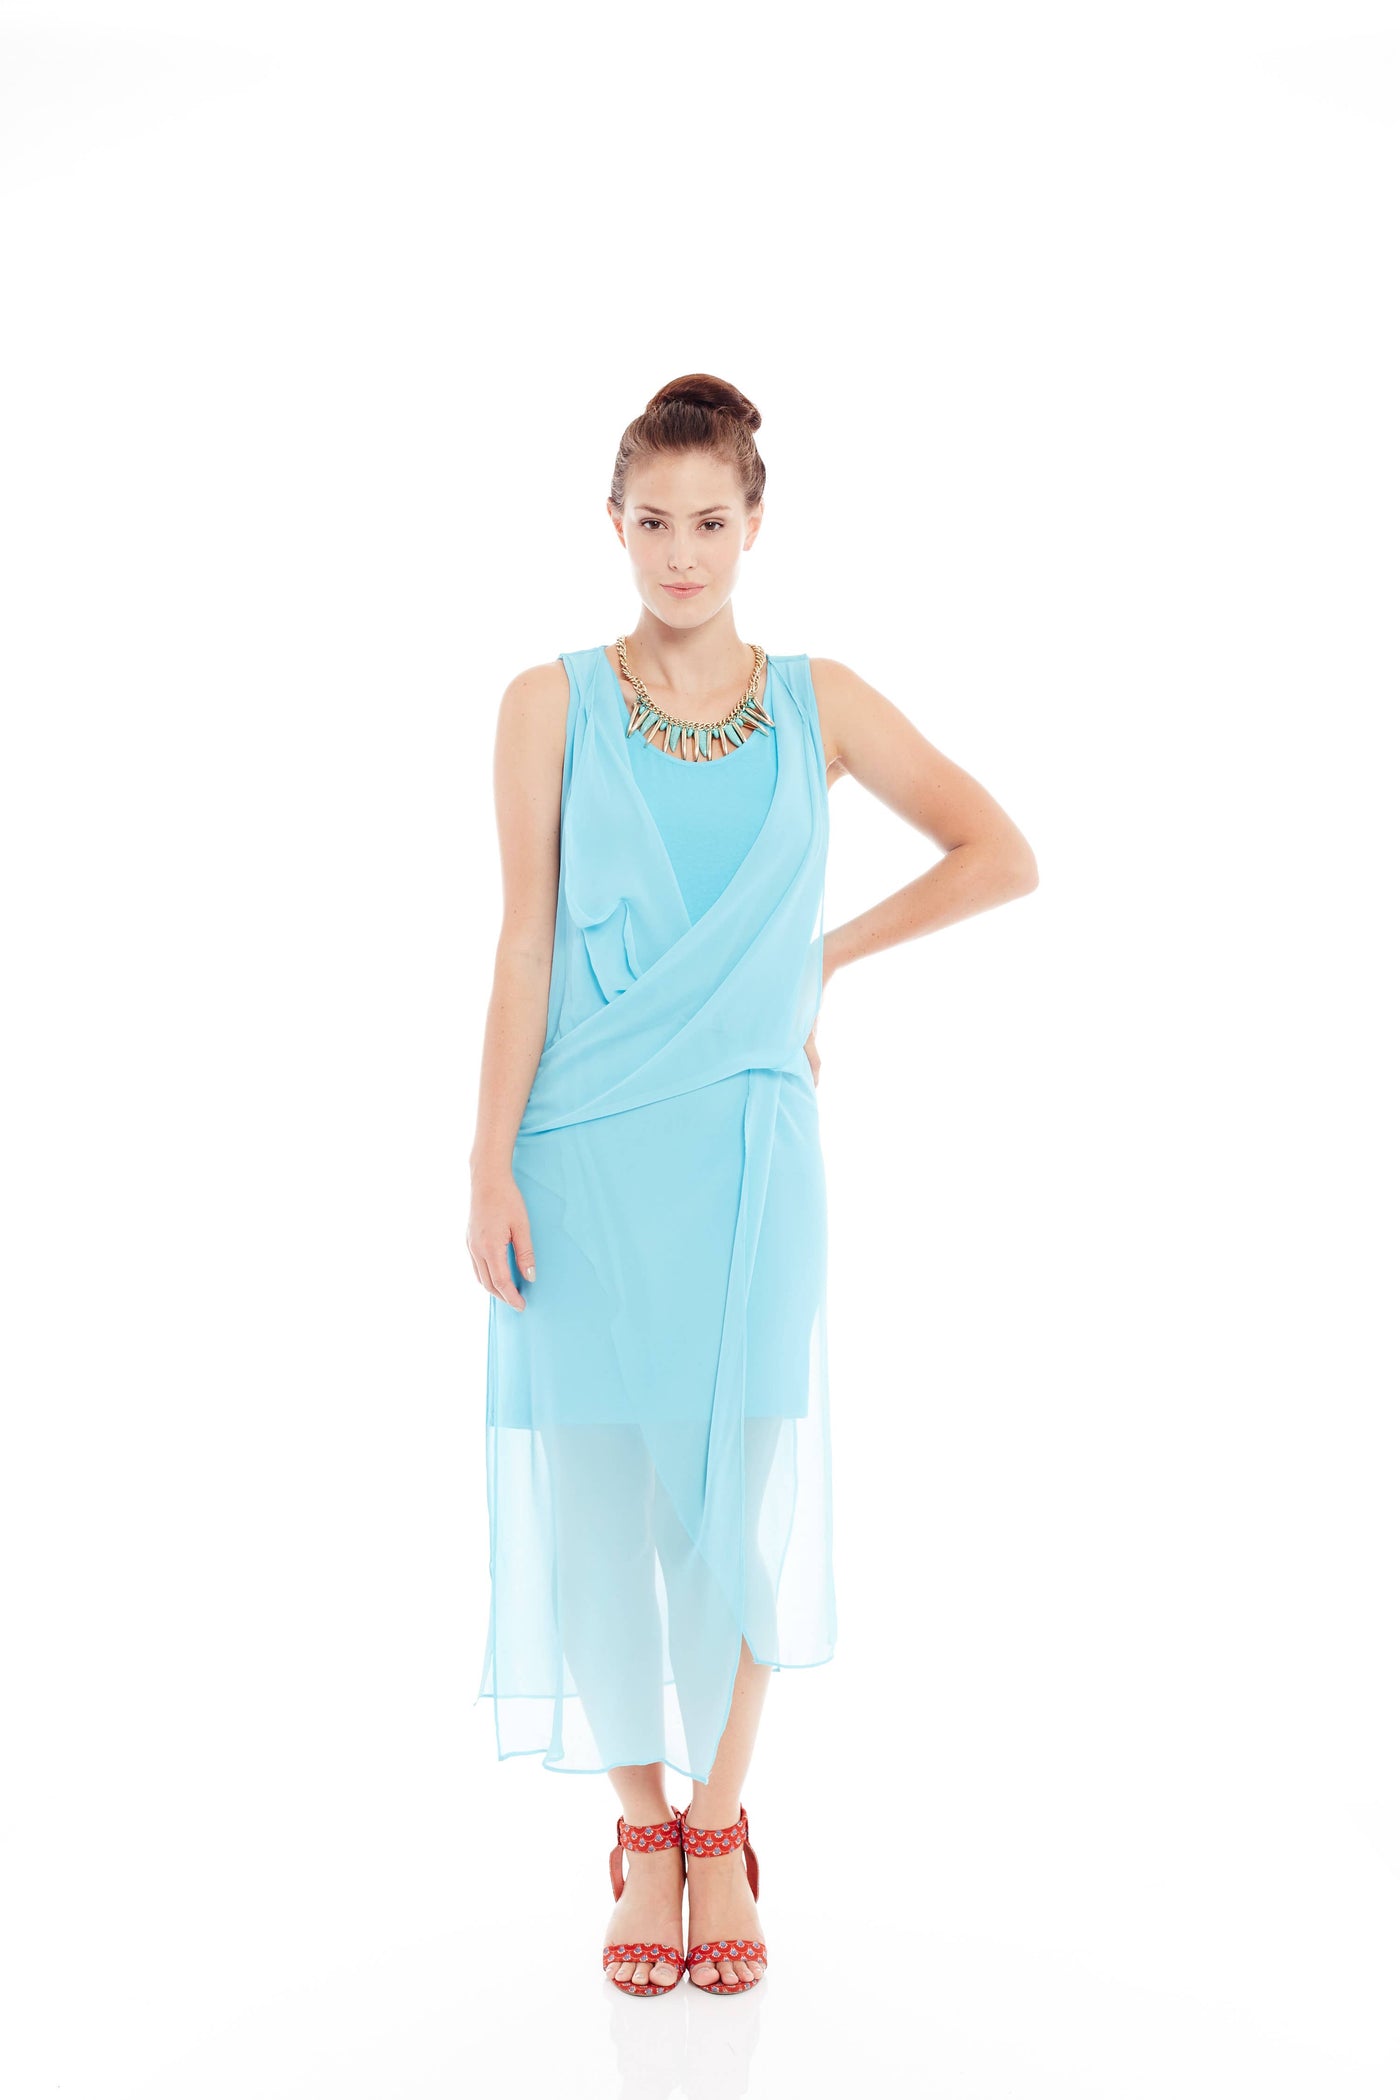 THE REBECA WRAP UP DRESS IN SKYISH BLUE